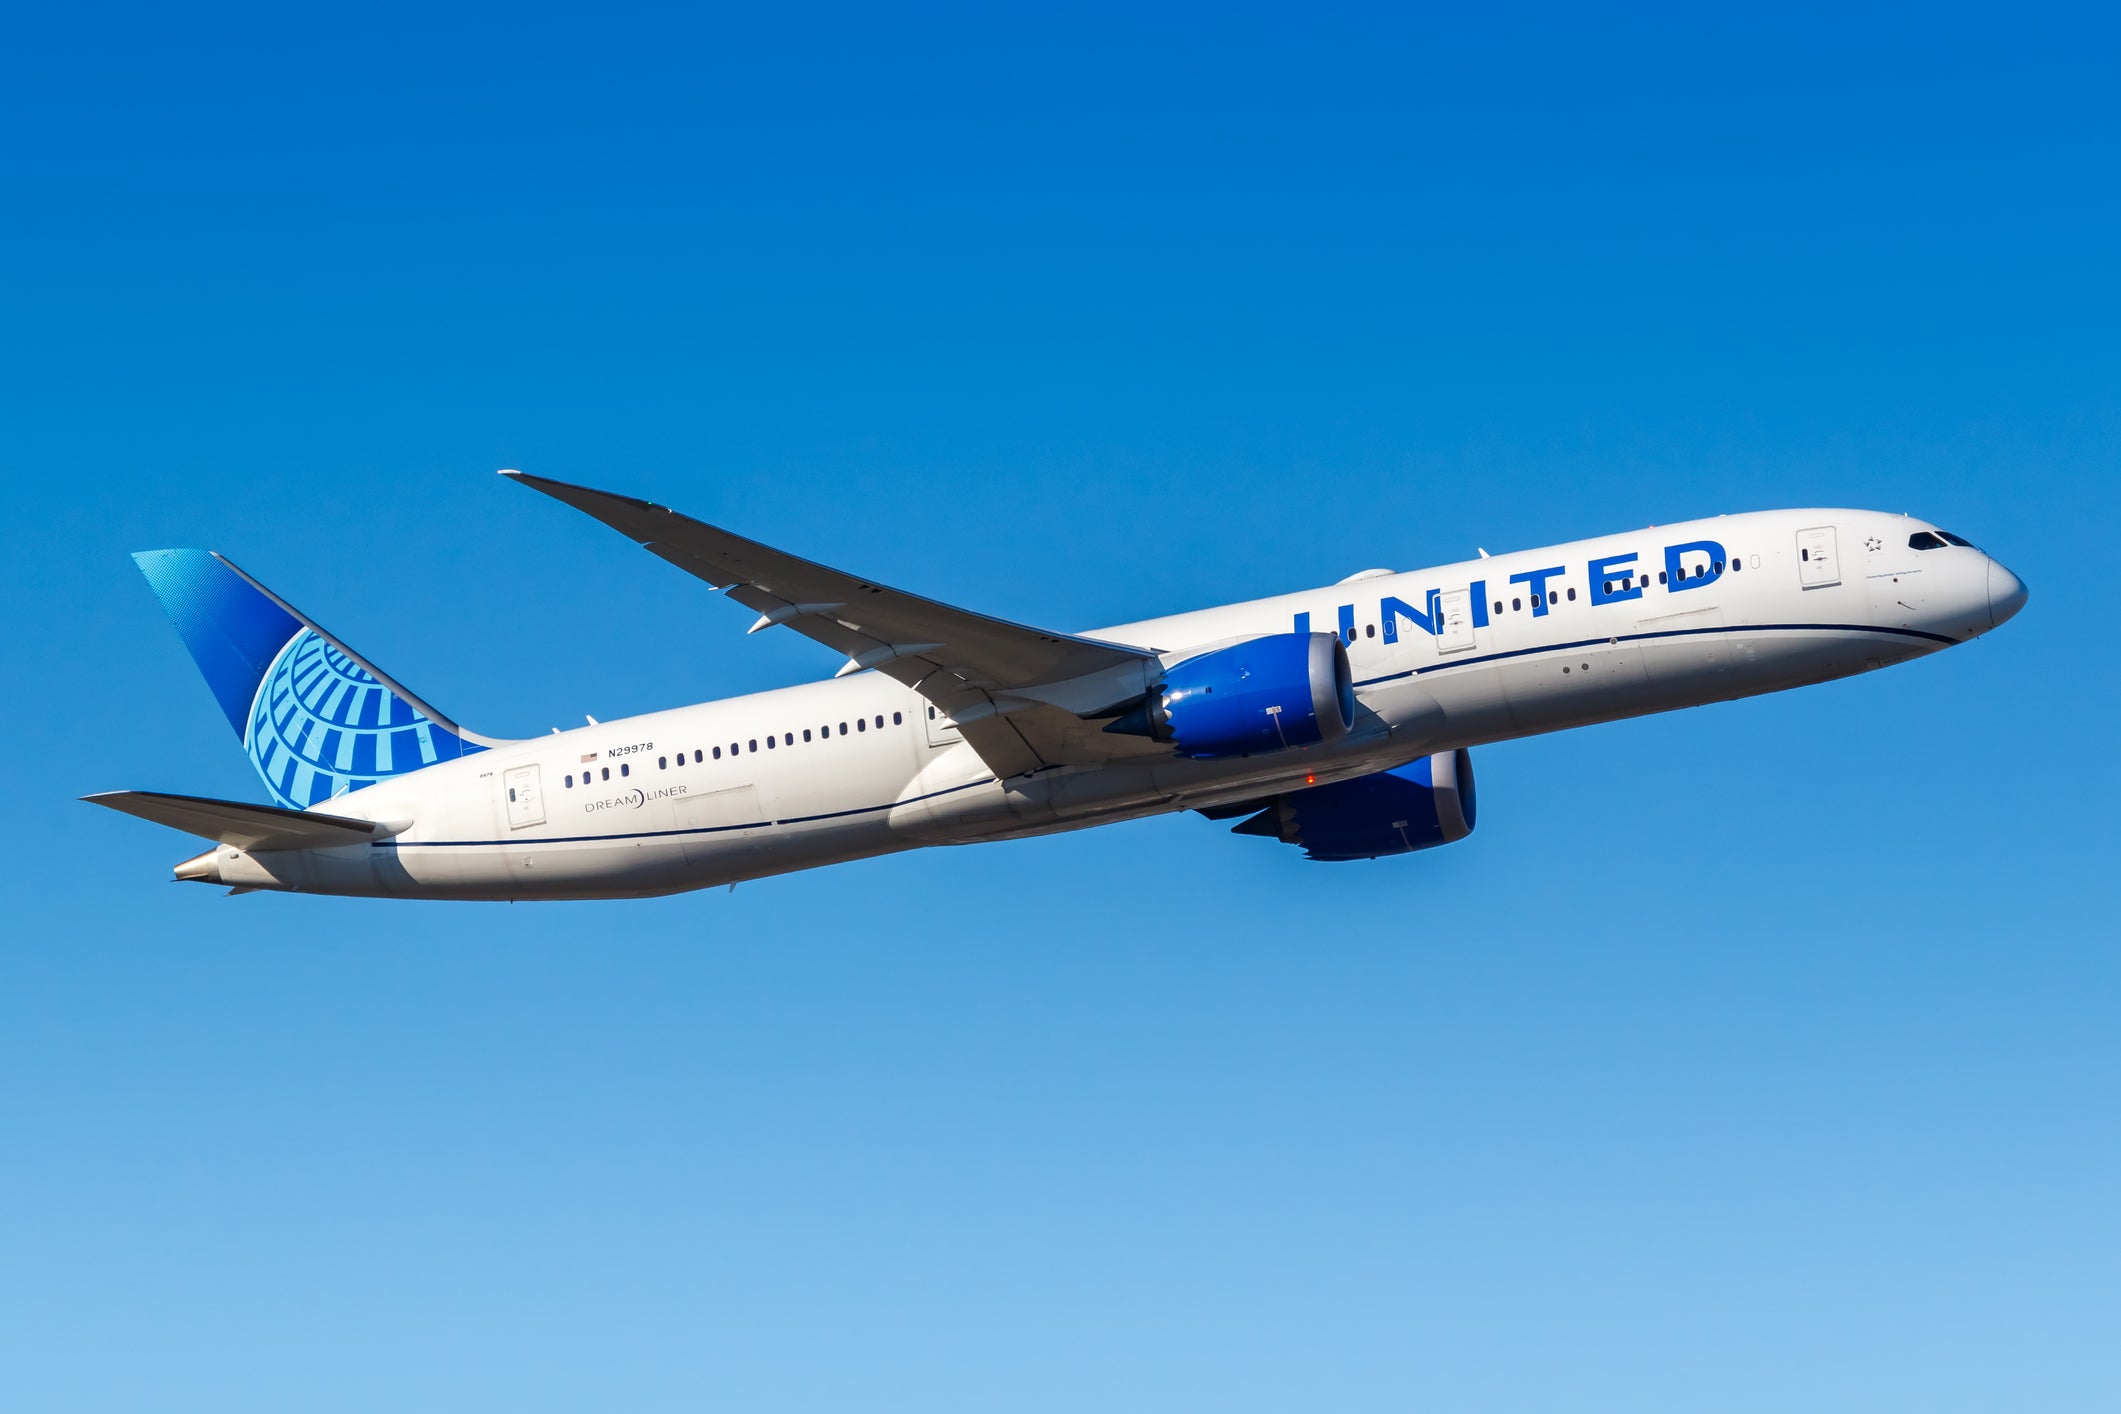 The incident occurred on a 10-hour United Airlines flight